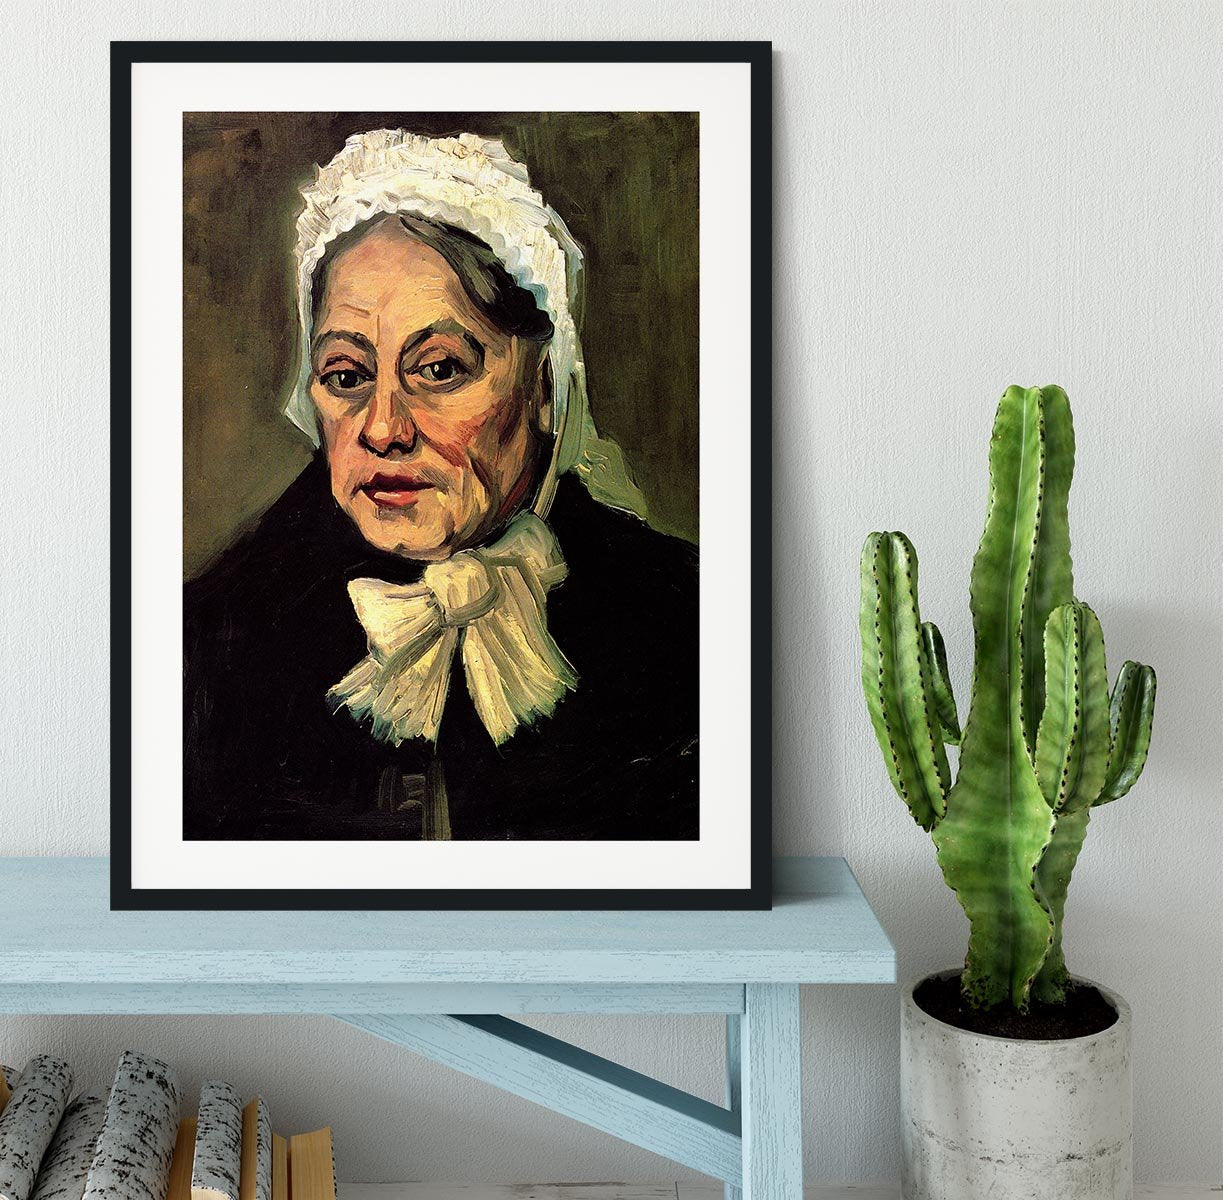 Head of an Old Woman with White Cap The Midwife by Van Gogh Framed Print - Canvas Art Rocks - 1